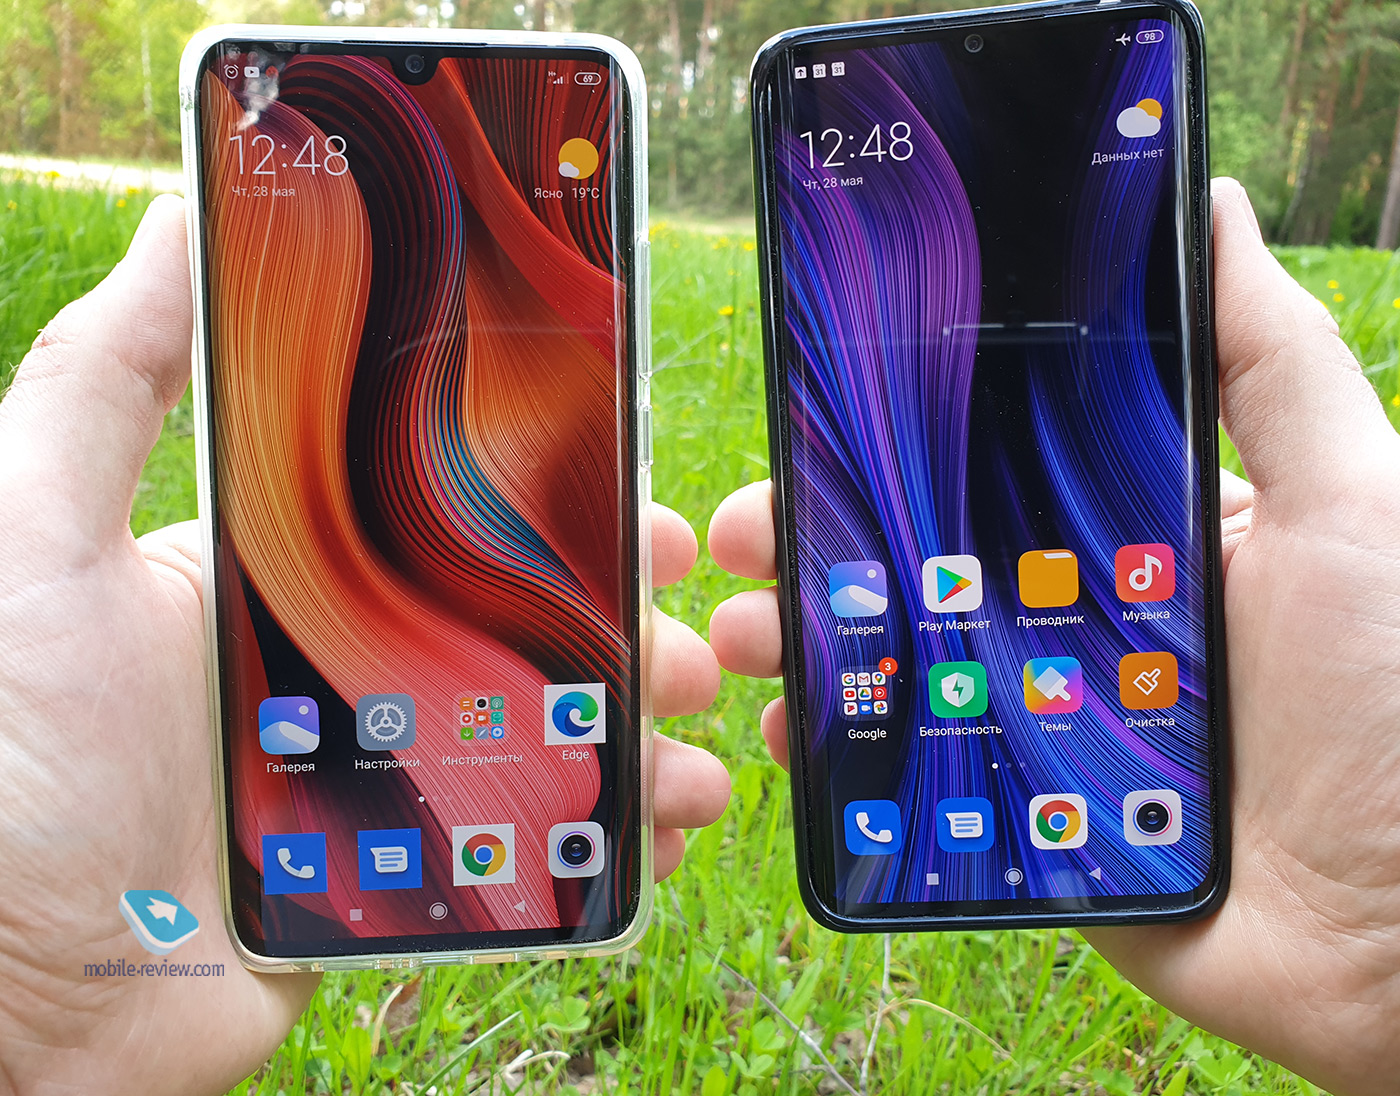 Mi Note 10 or Mi Note 10 Lite: to save 7 rubles or not?